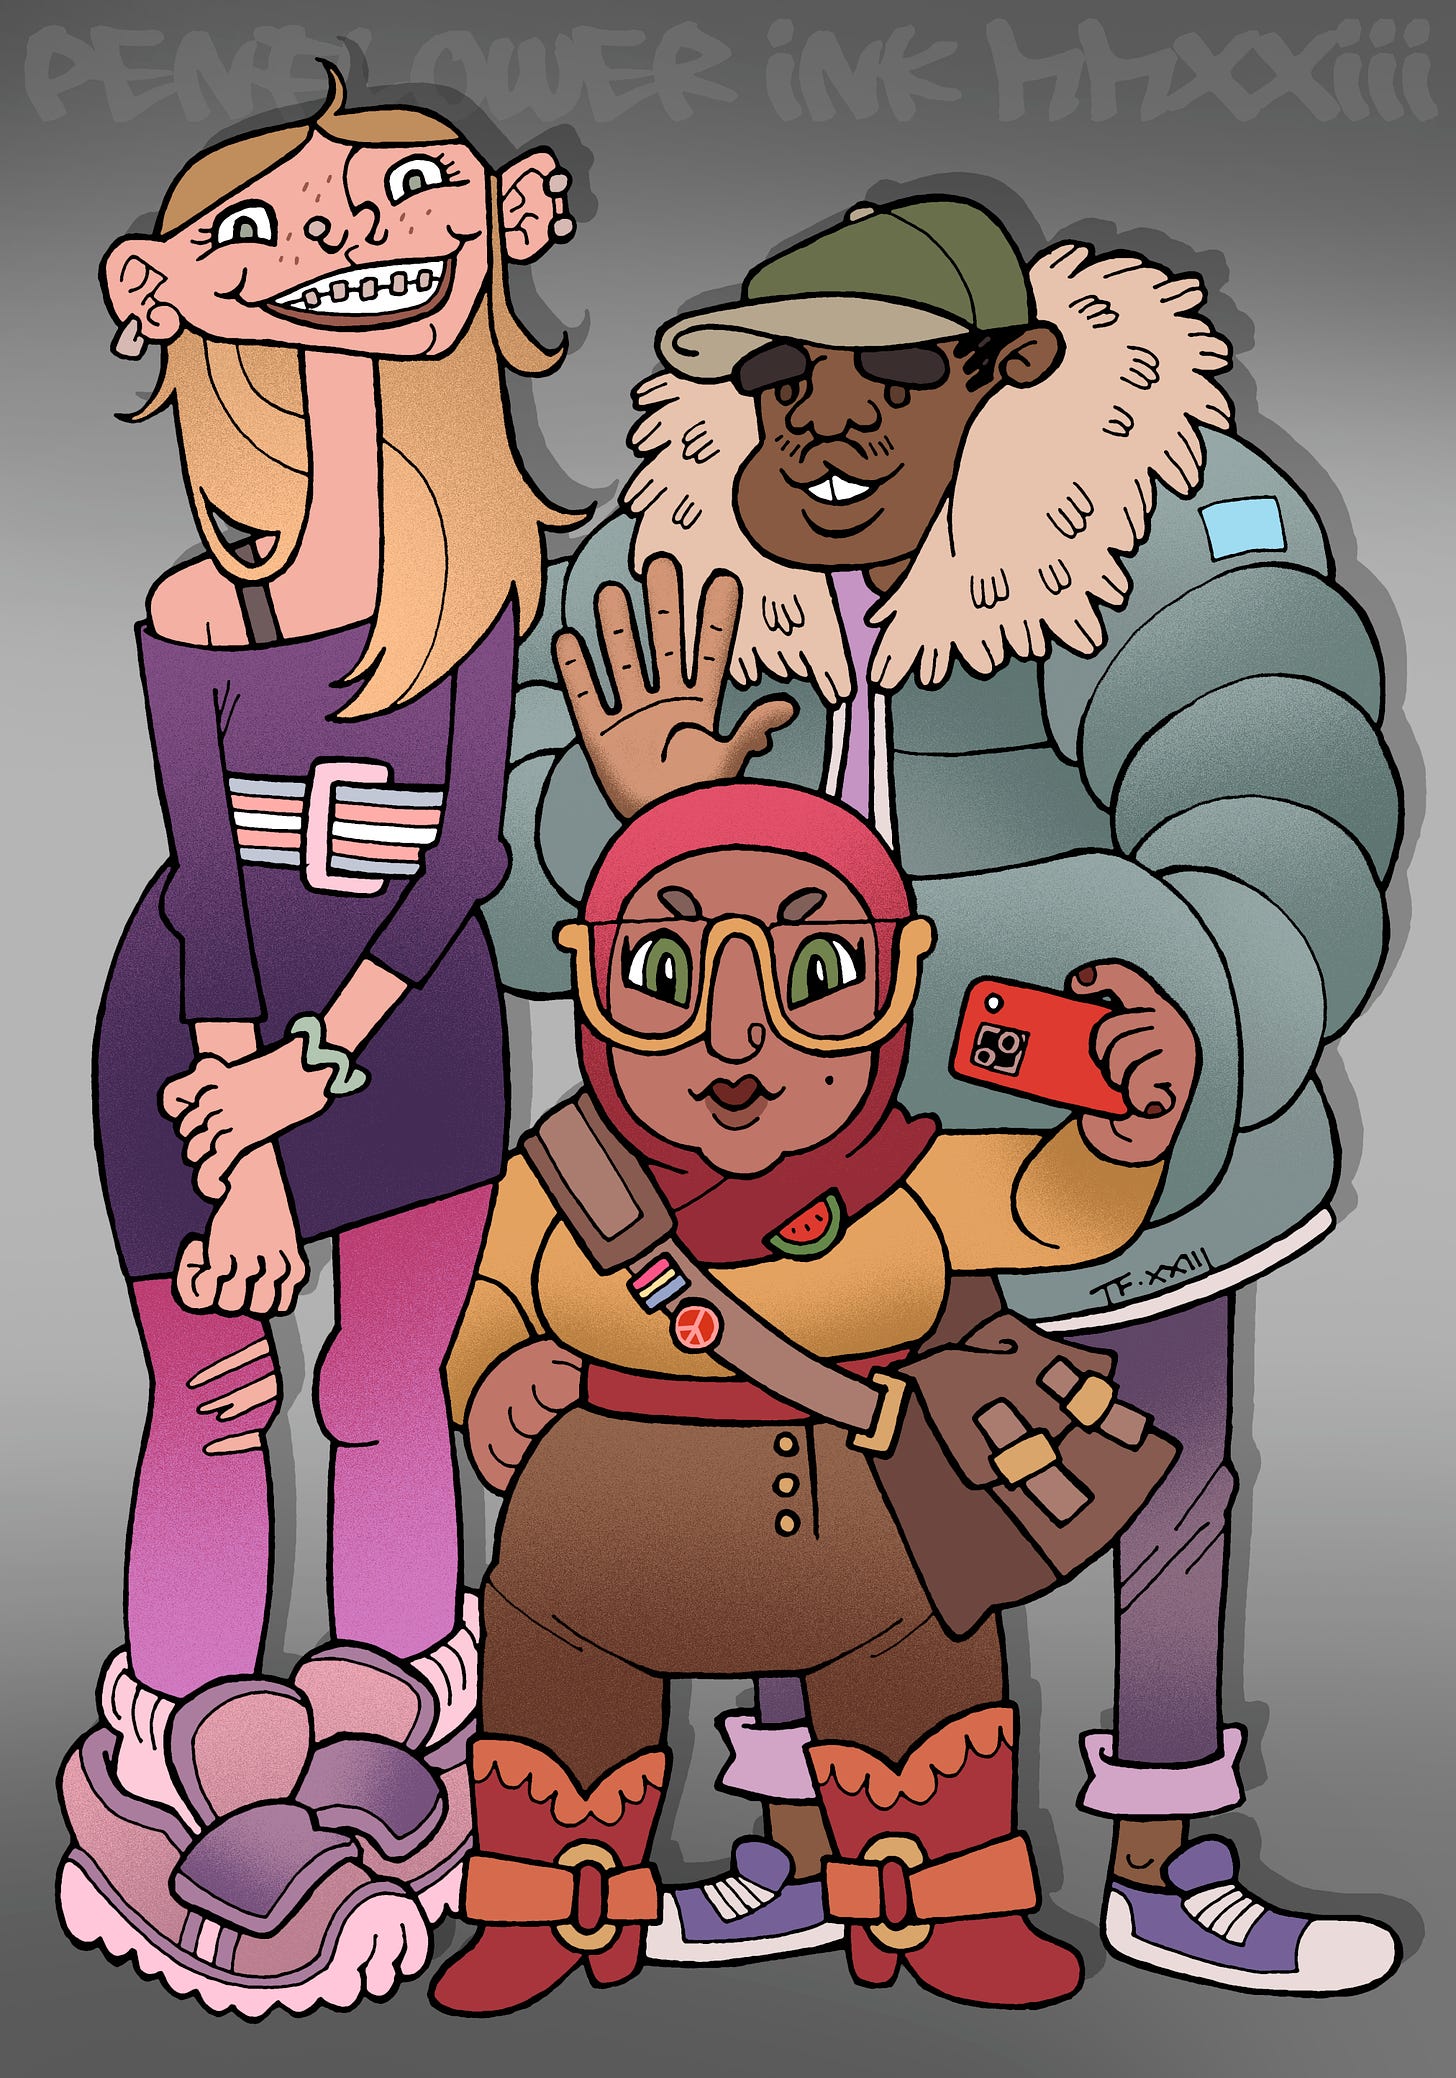 Traditionally hand drawn and digitally coloured illustration of three teenagers, in an exaggerated cartoony style. From left to right, a tall and gangly blonde trans girl with freckles and braces, wearing shades of pink and purple, as well as a nervous grin. A short brown girl wearing a hijab, large yellow framed glasses, red and orange boots and a satchel, holding up a smartphone. A tall black boy with burgeoning facial hair, wearing a baseball cap, puffy jacket with fluffy hood, skinny jeans and trainers.